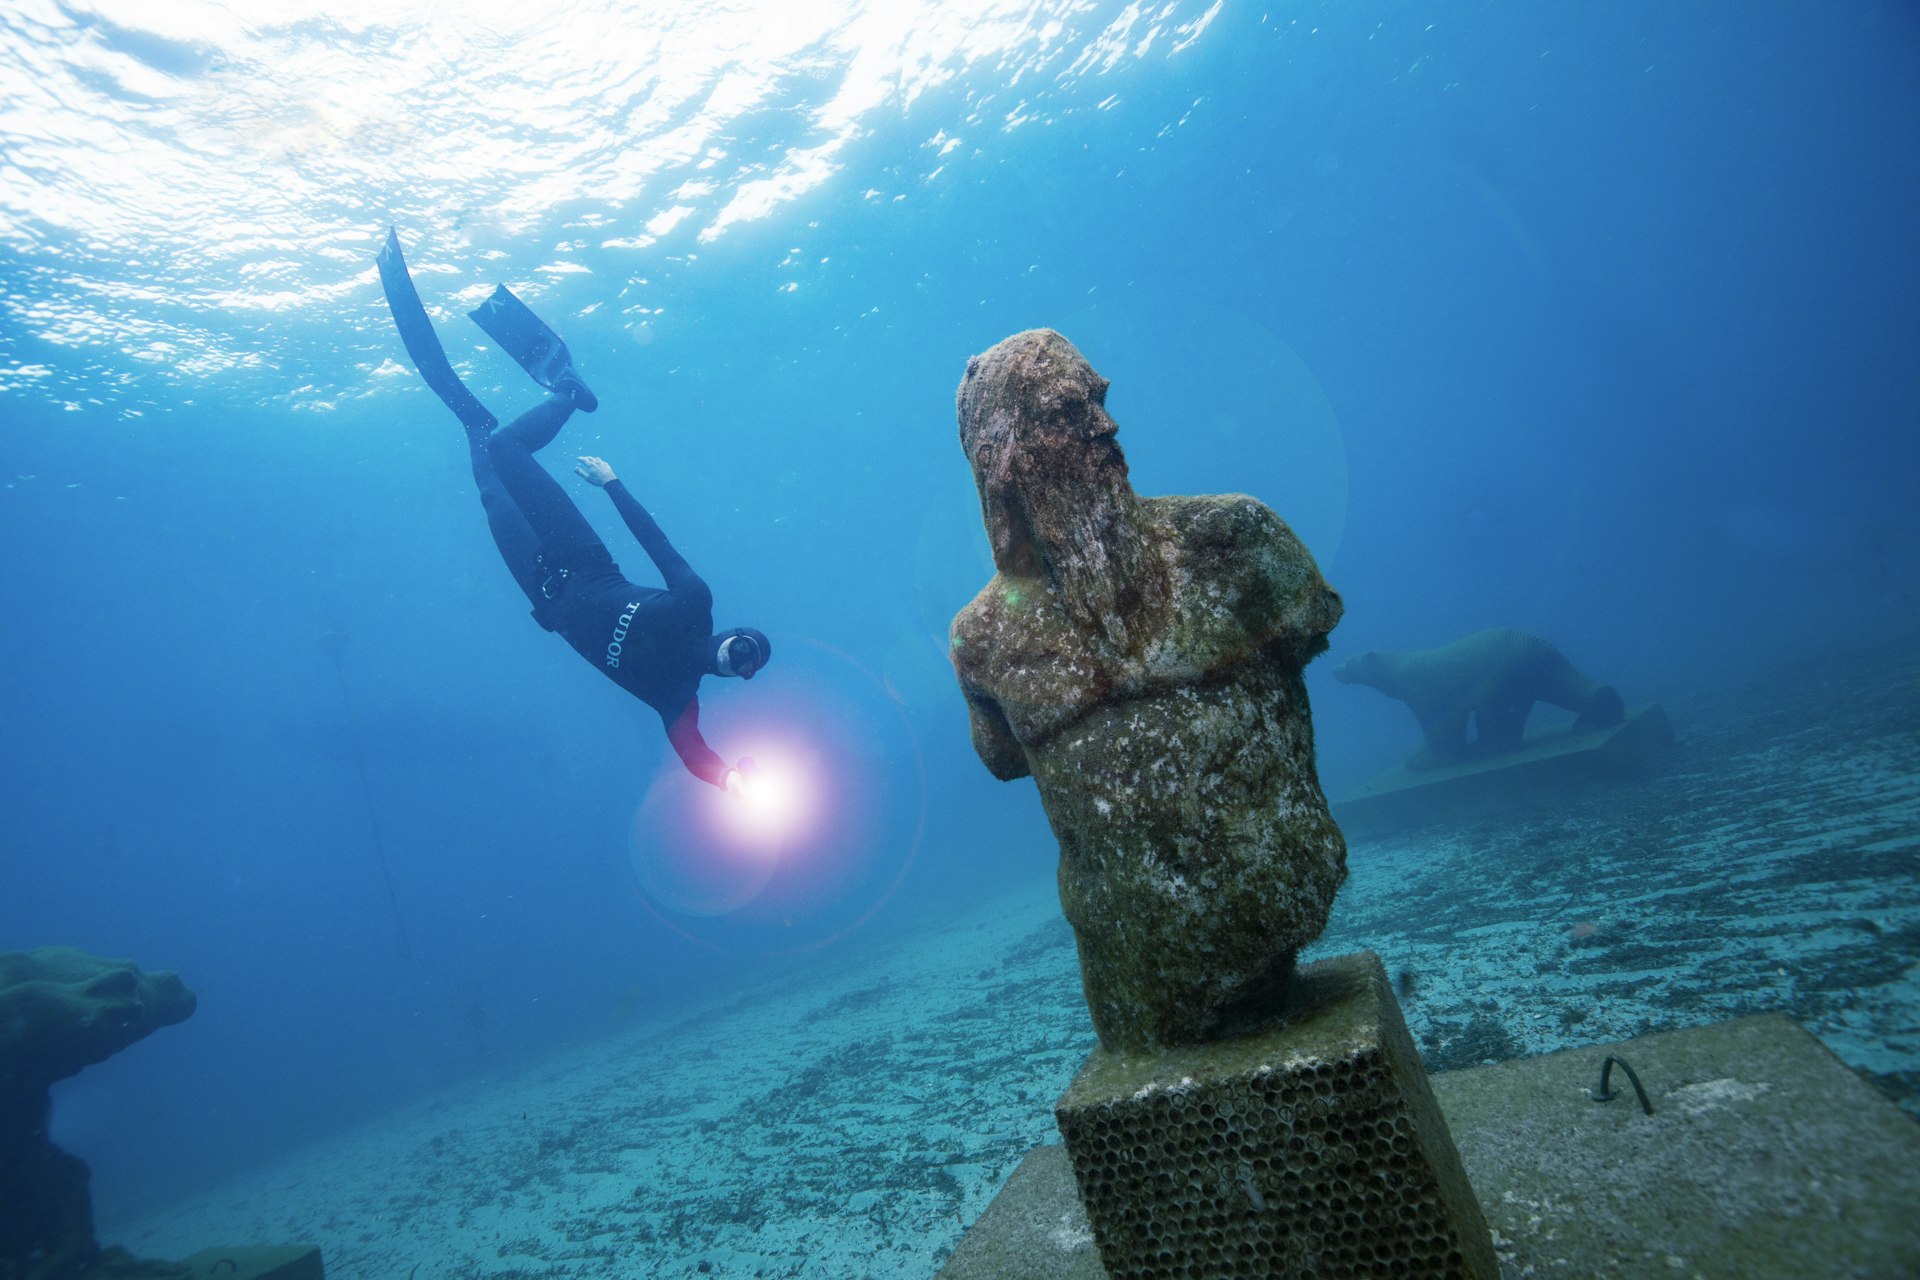 An underwater shot of a diver approaching a statue of Poseidon which stands on the seabed